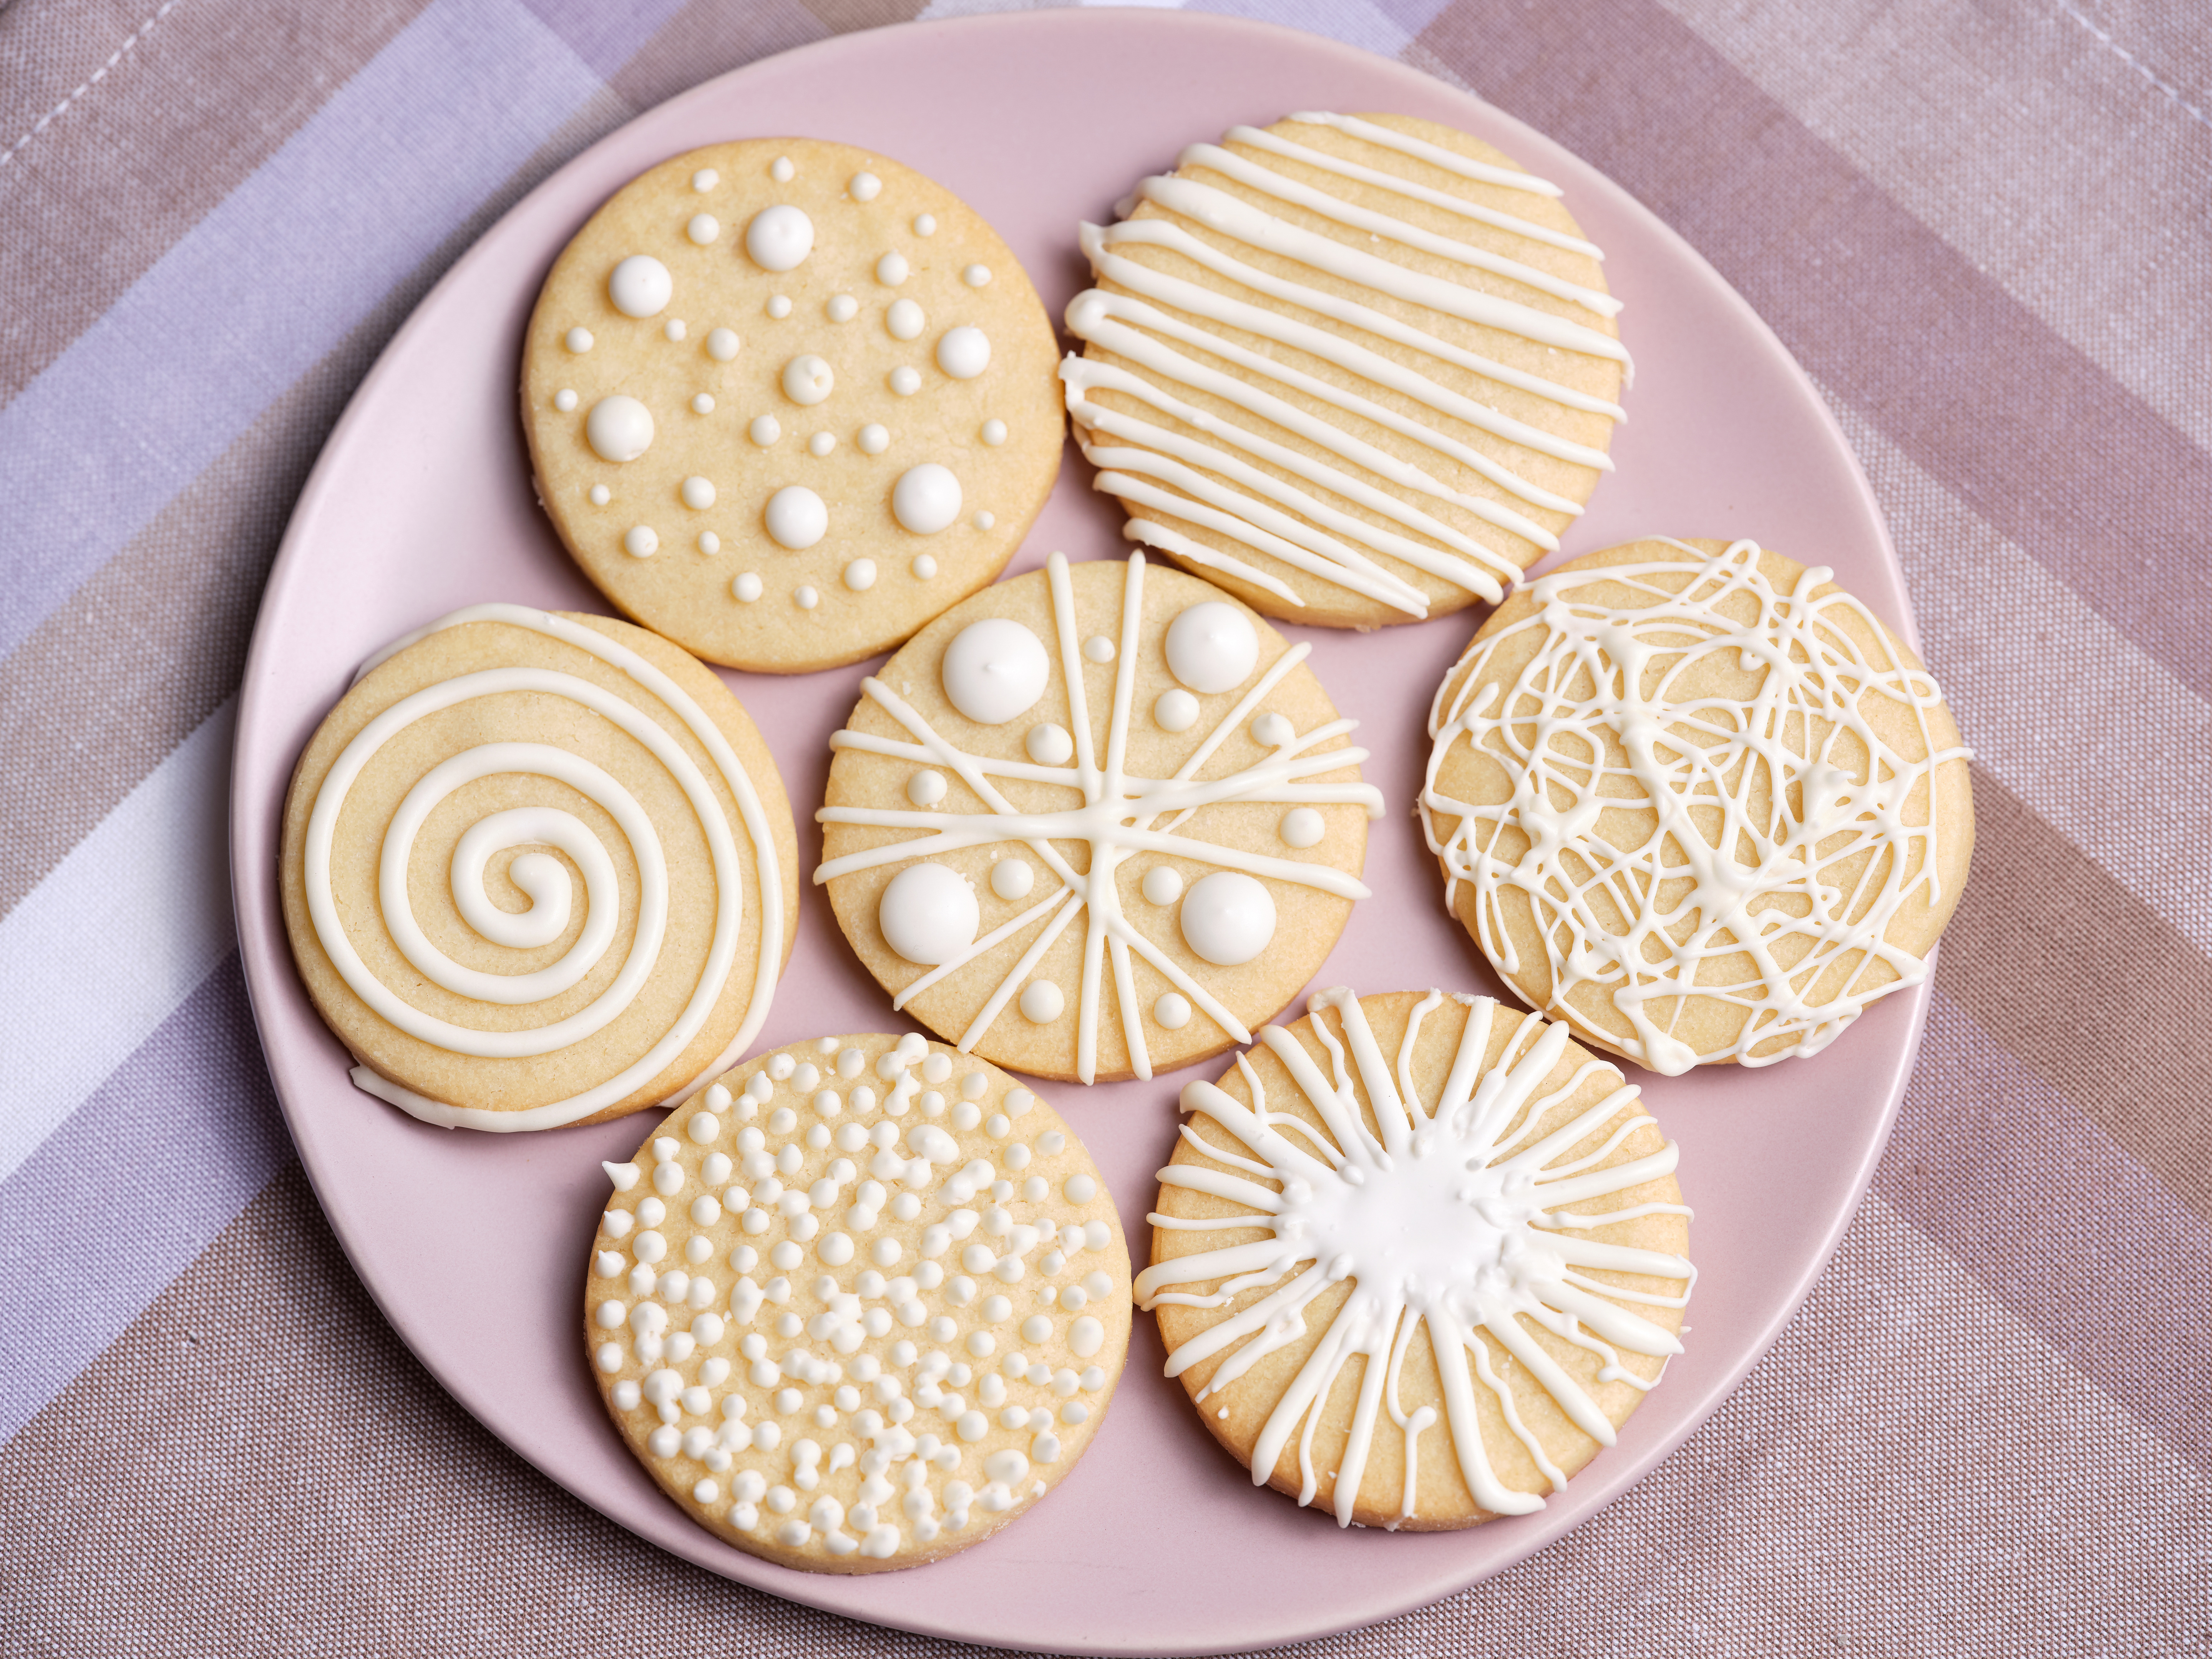 The Best Sugar Cookies for Decorating Recipe | Food Network ...